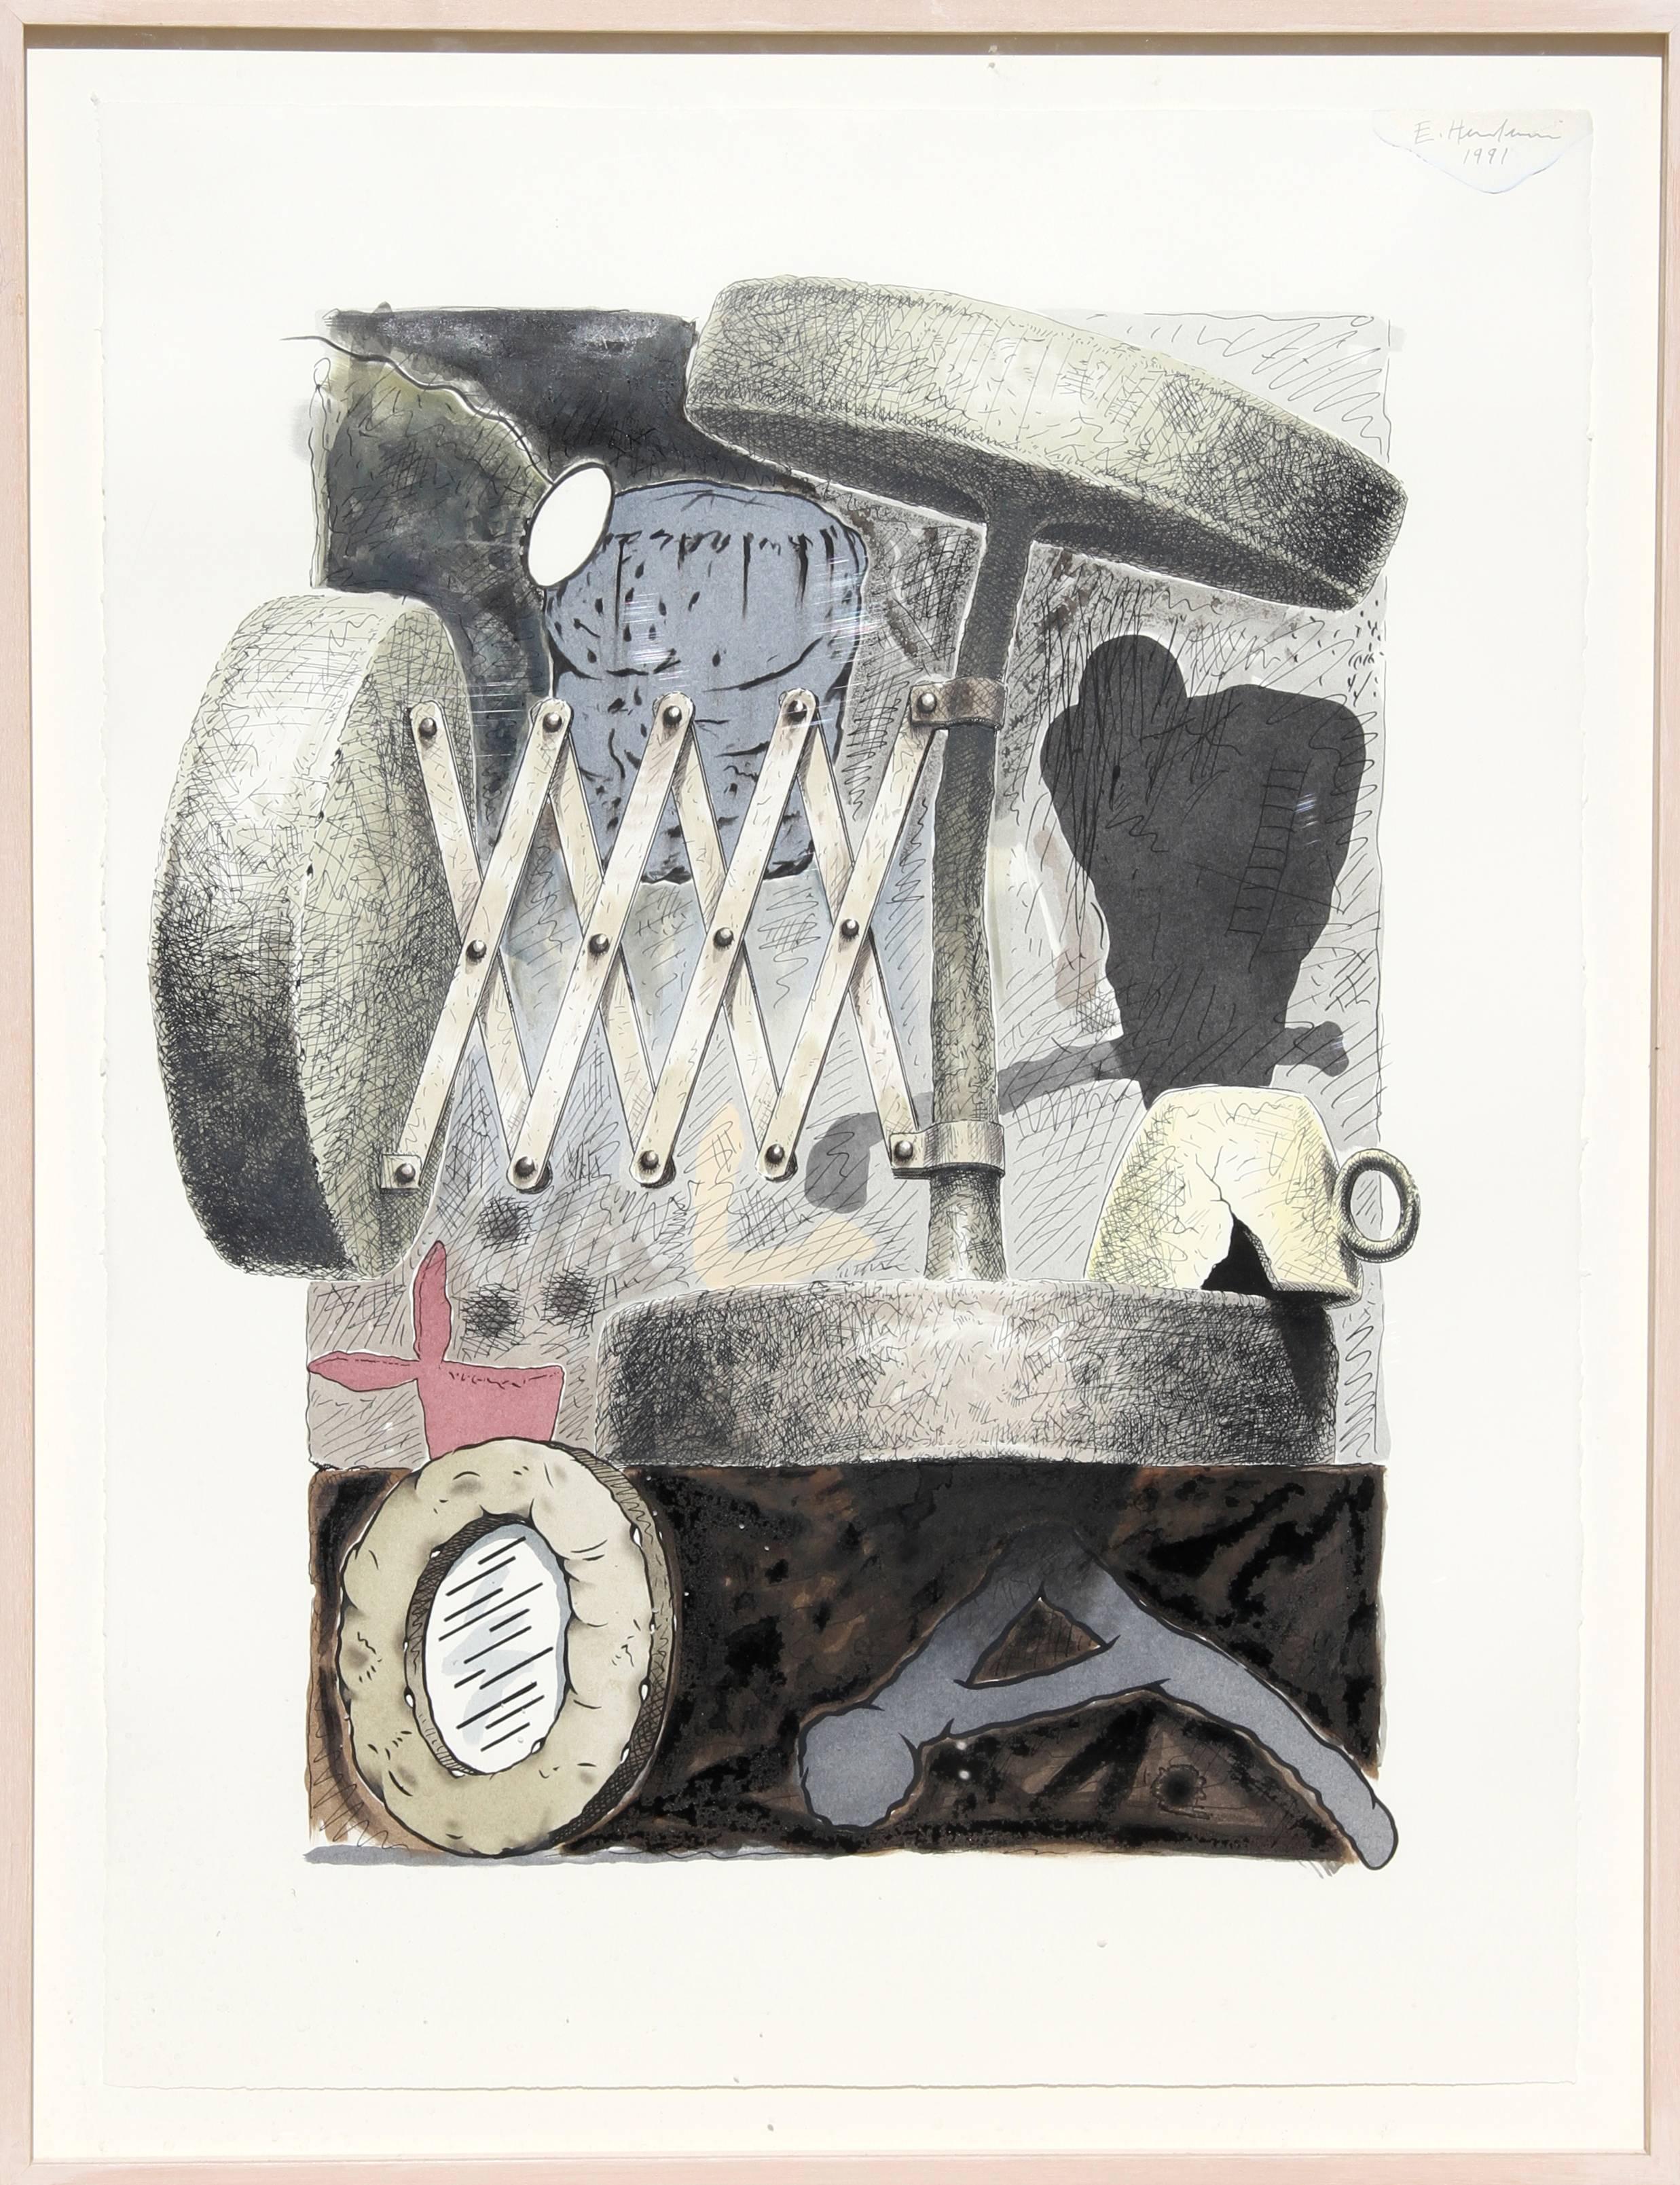 Edward Henderson, "Untitled 1, " Mixed Media Painting on Paper, 1991